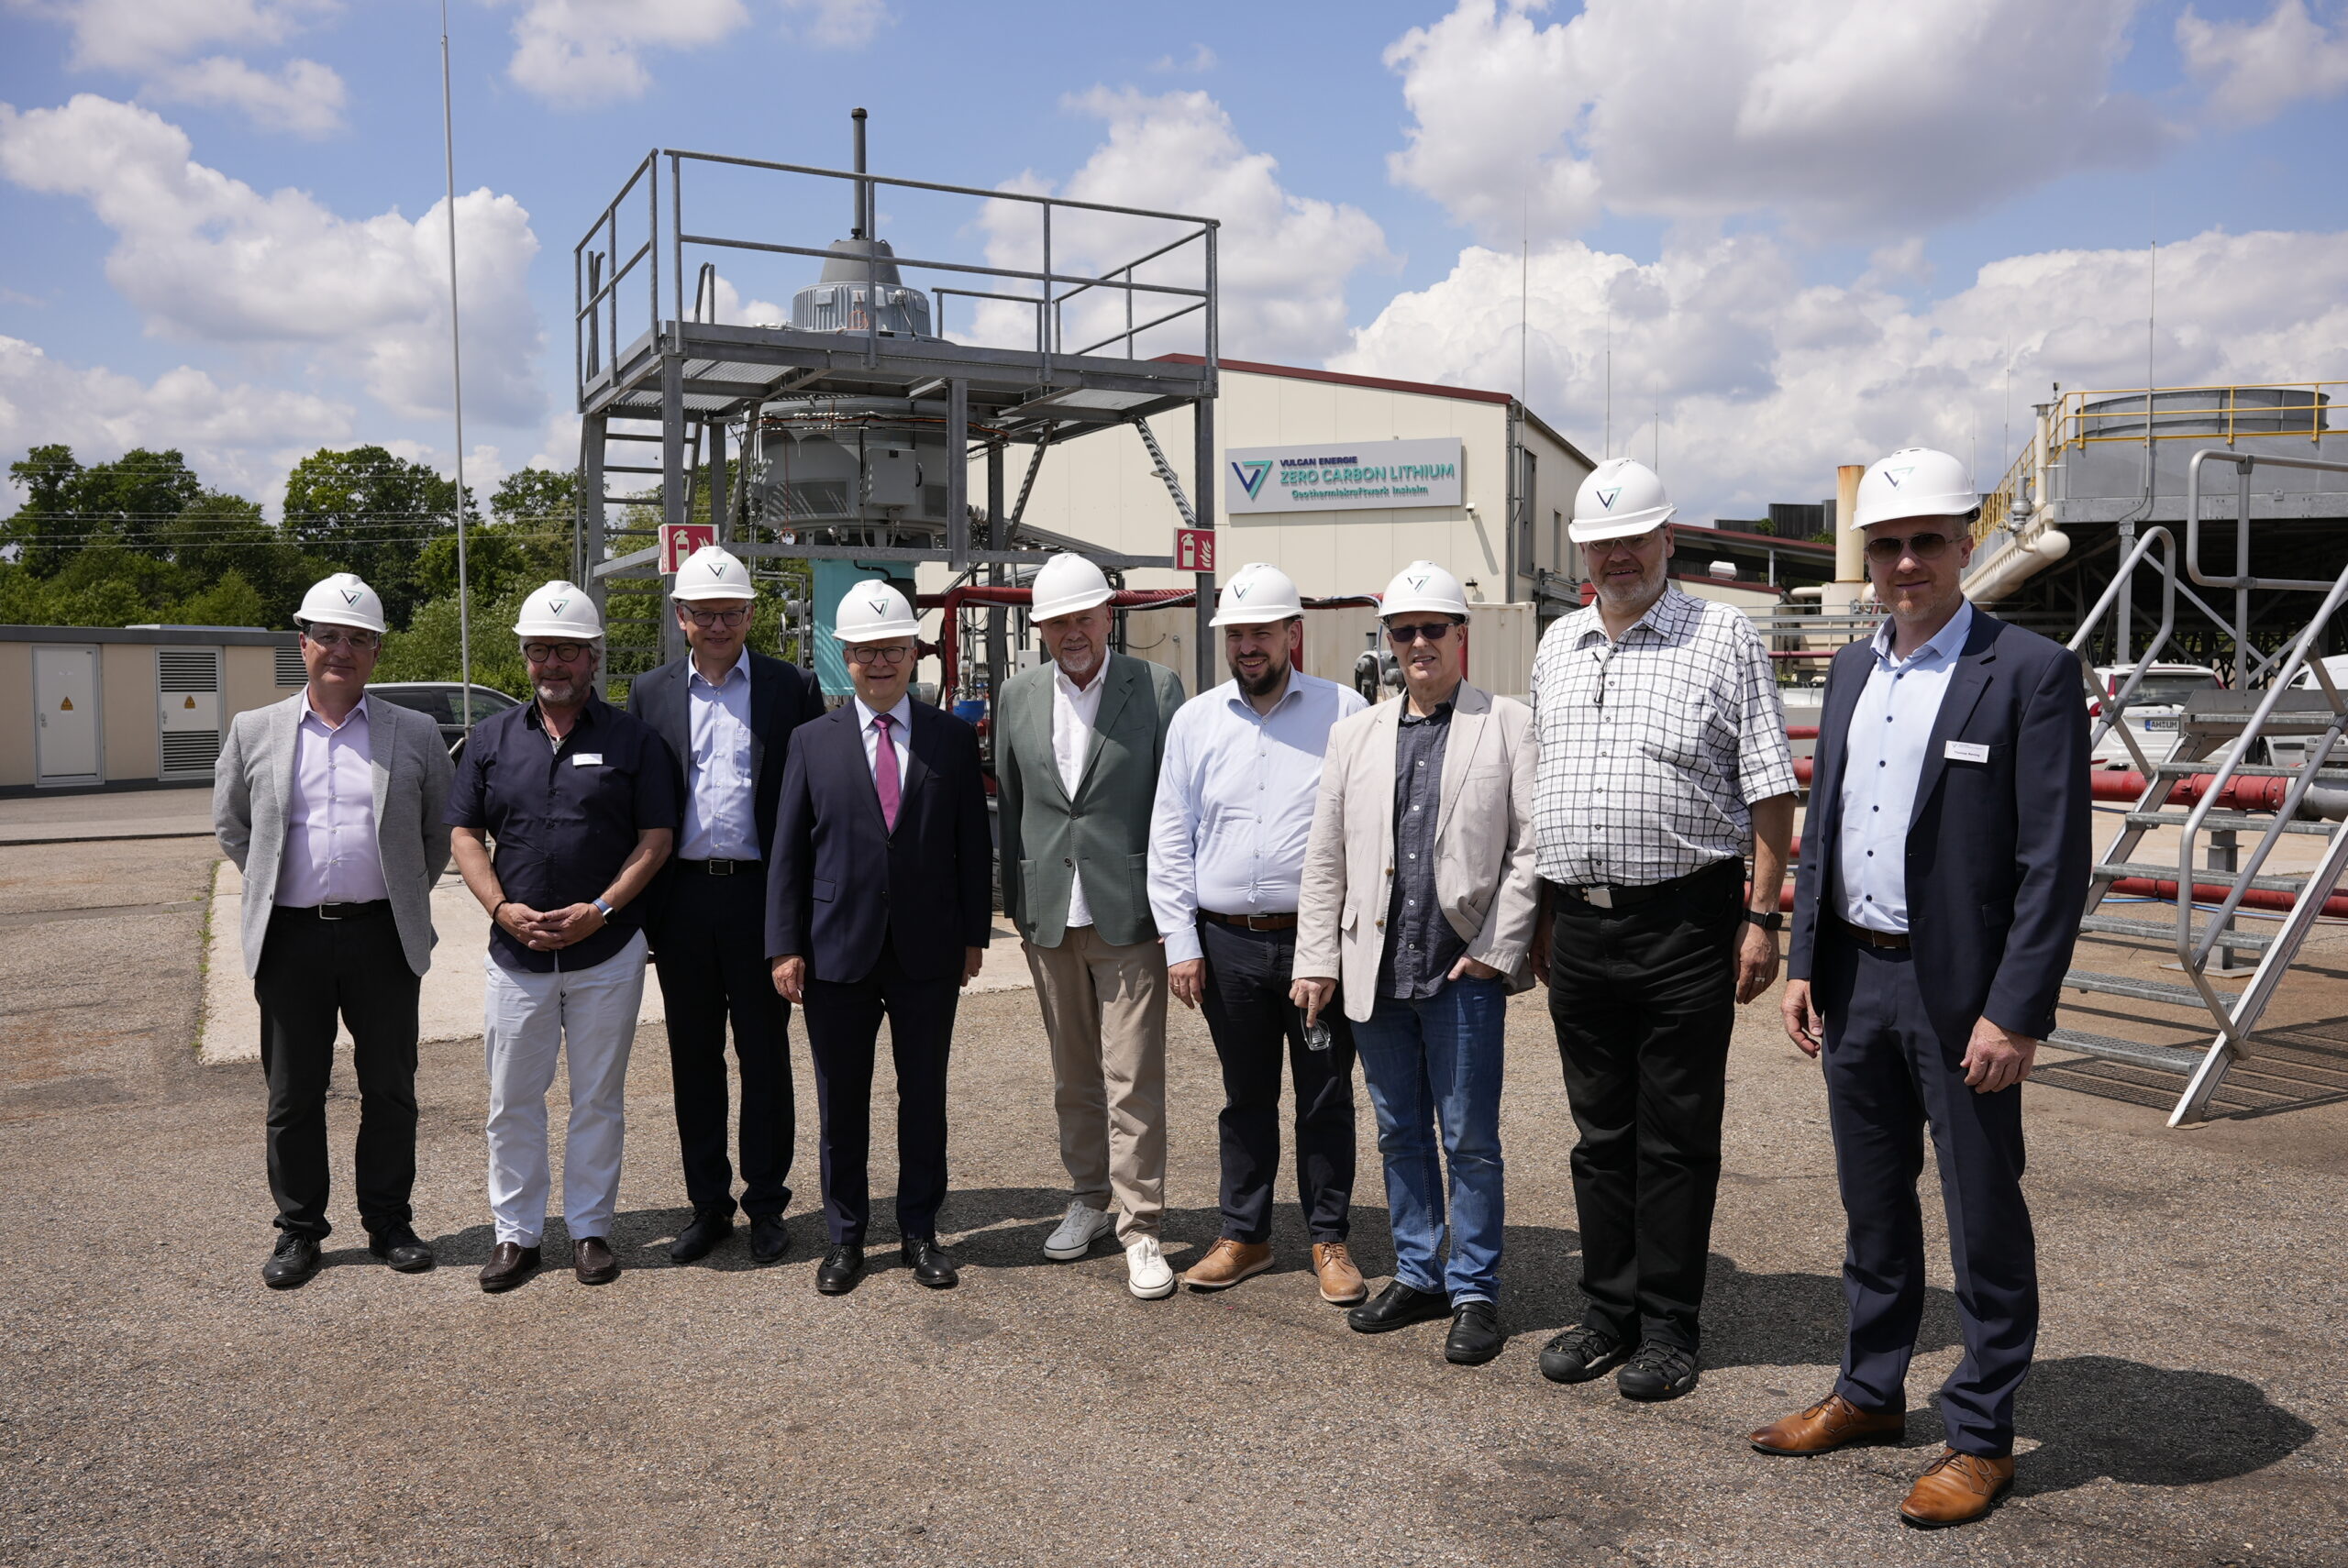 Michael Theurer visits geothermal power plant in Insheim